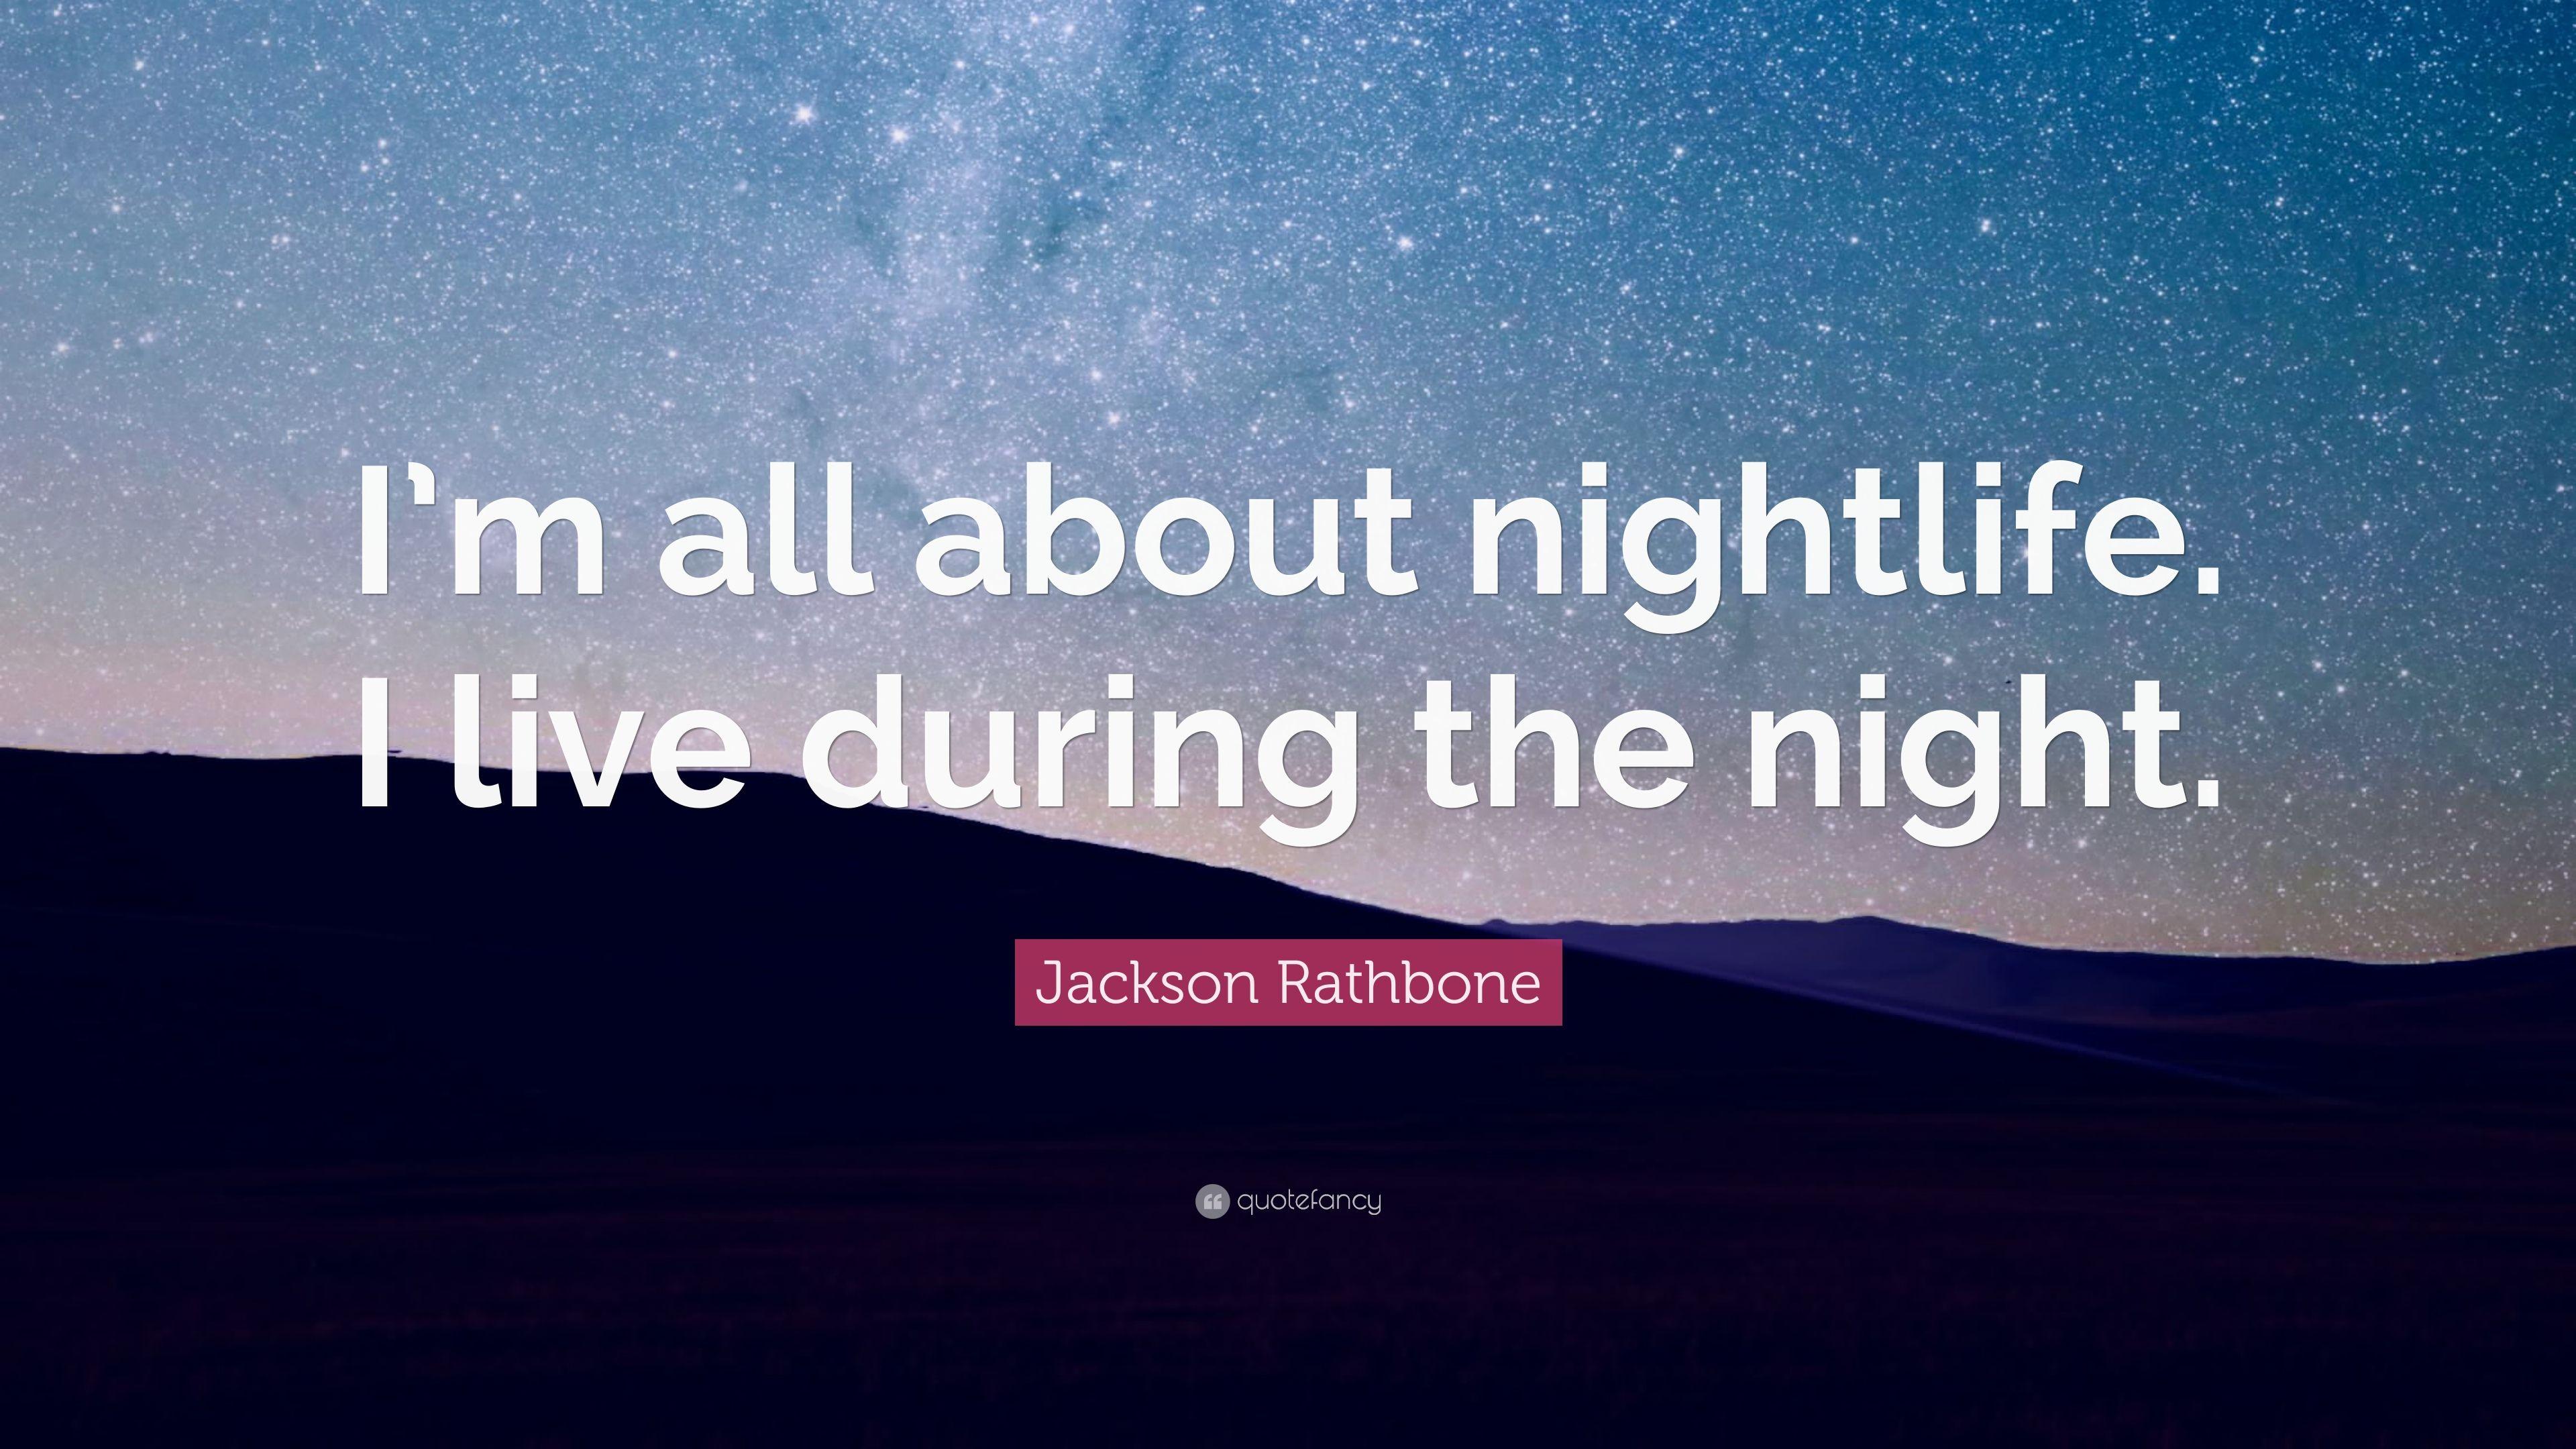 Jackson Rathbone Quote: “I'm all about nightlife. I live during